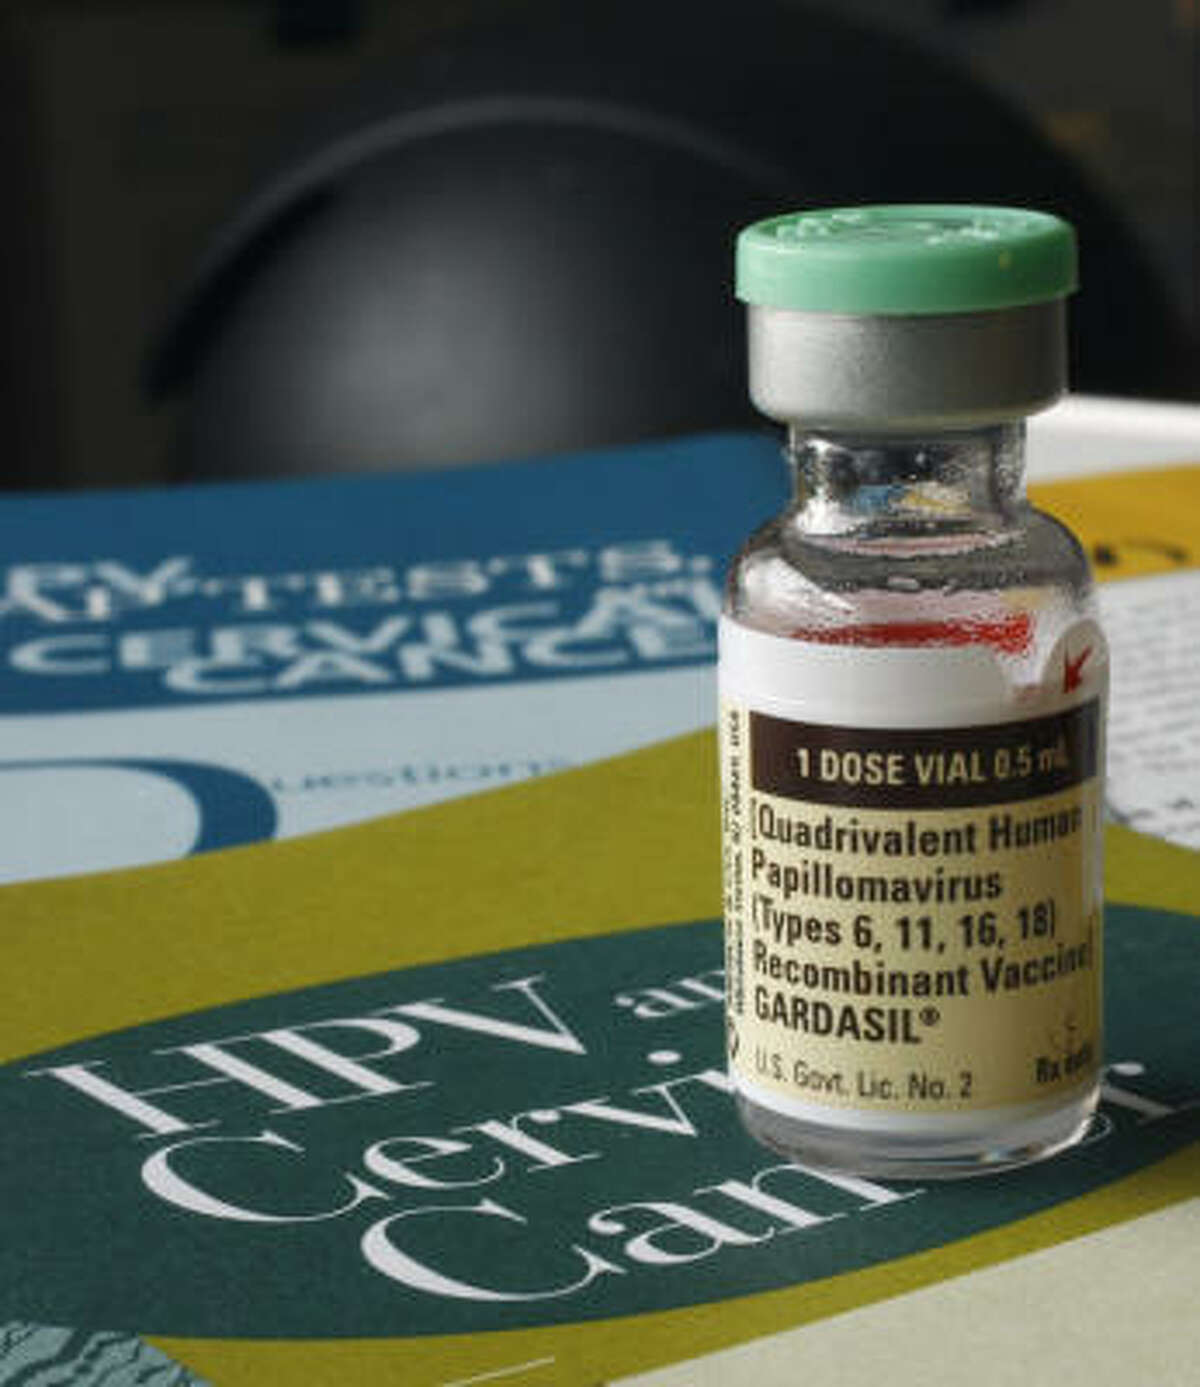 From, among others, the Texas Medical Association and the American Academy of Pediatrics, many doctors are saying it's too early to mandate the vaccine, which was approved for use last June. It protects against four strains of the human papillomavirus that cause 70 percent of cervical cancers.